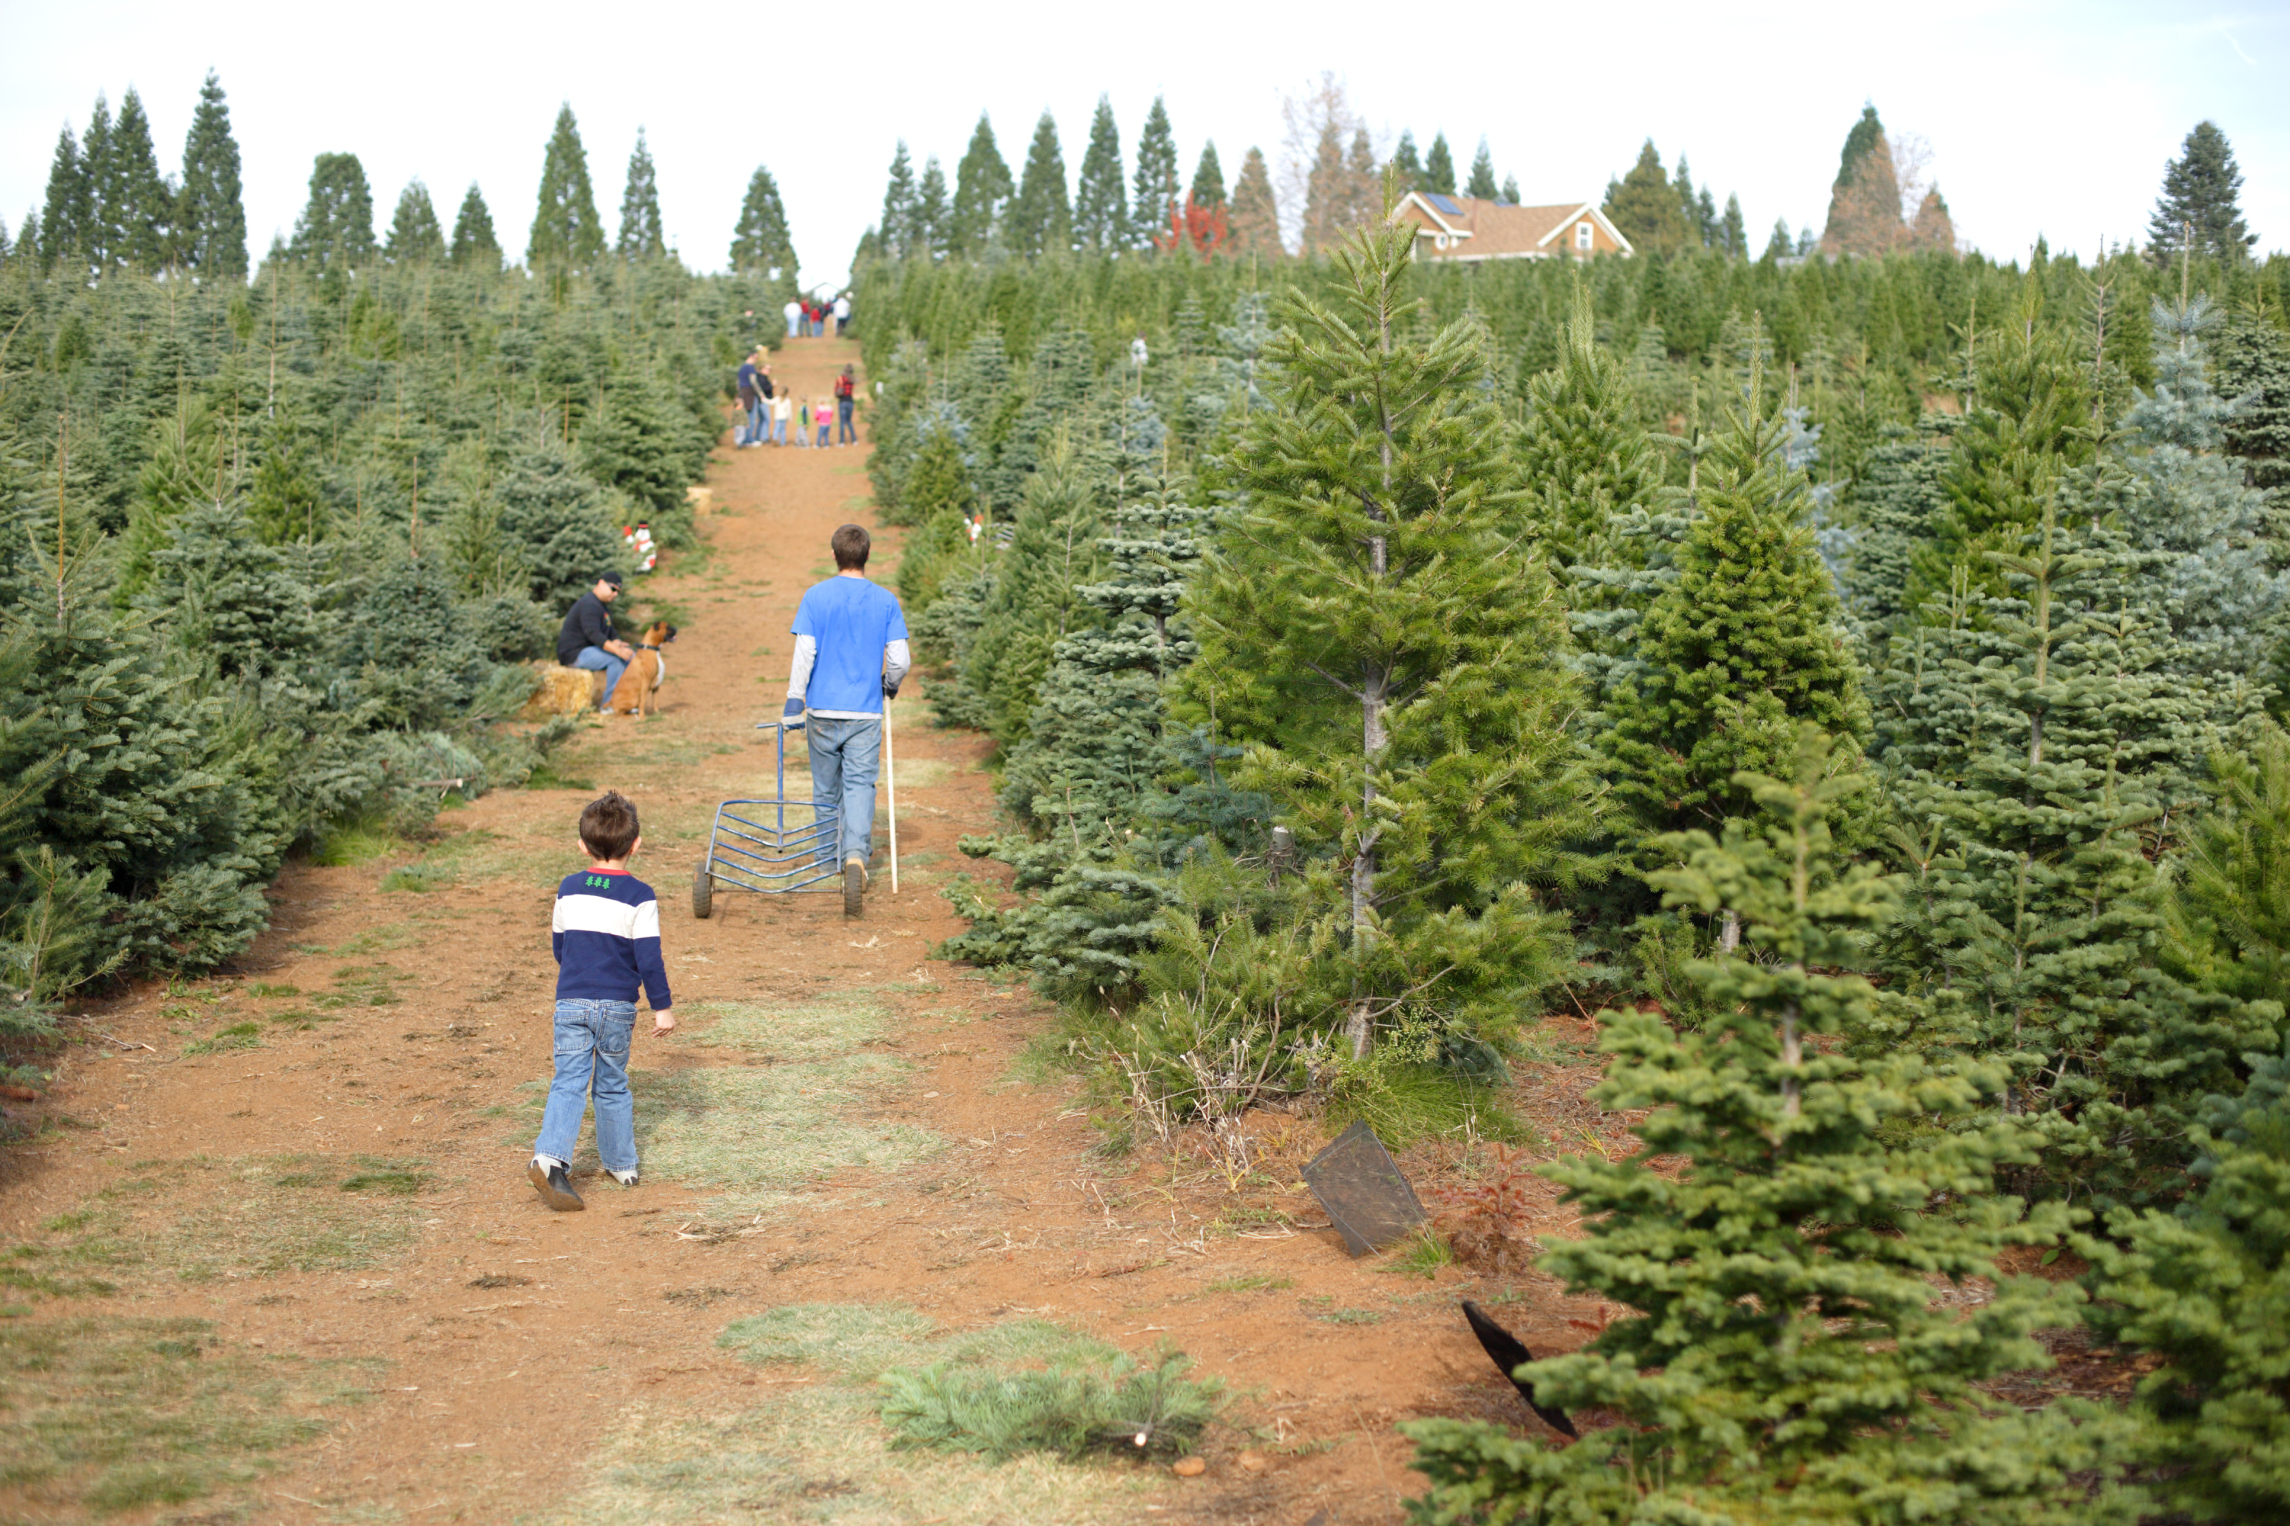 Christmas Tree Care – Fire Prevention and Safety